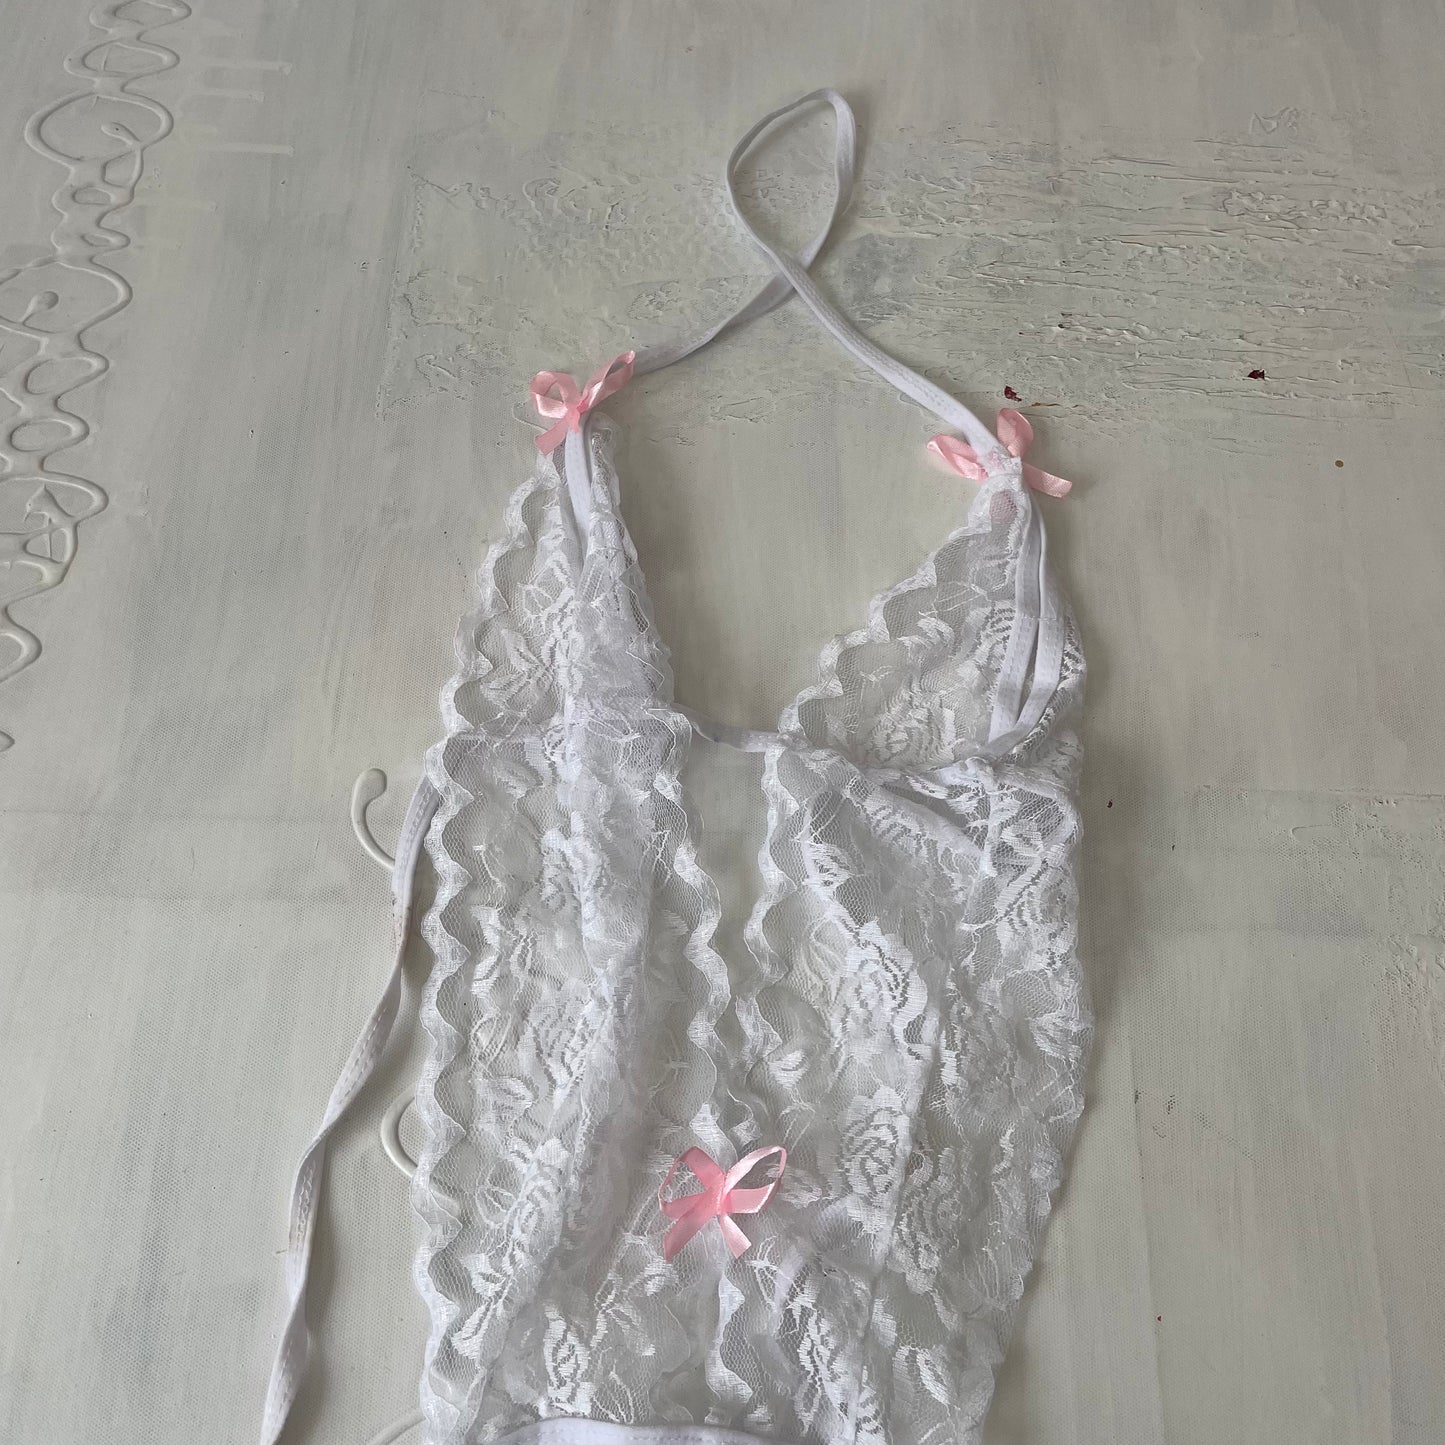 DAINTY DROP | white lace bodysuit with pink bows - small